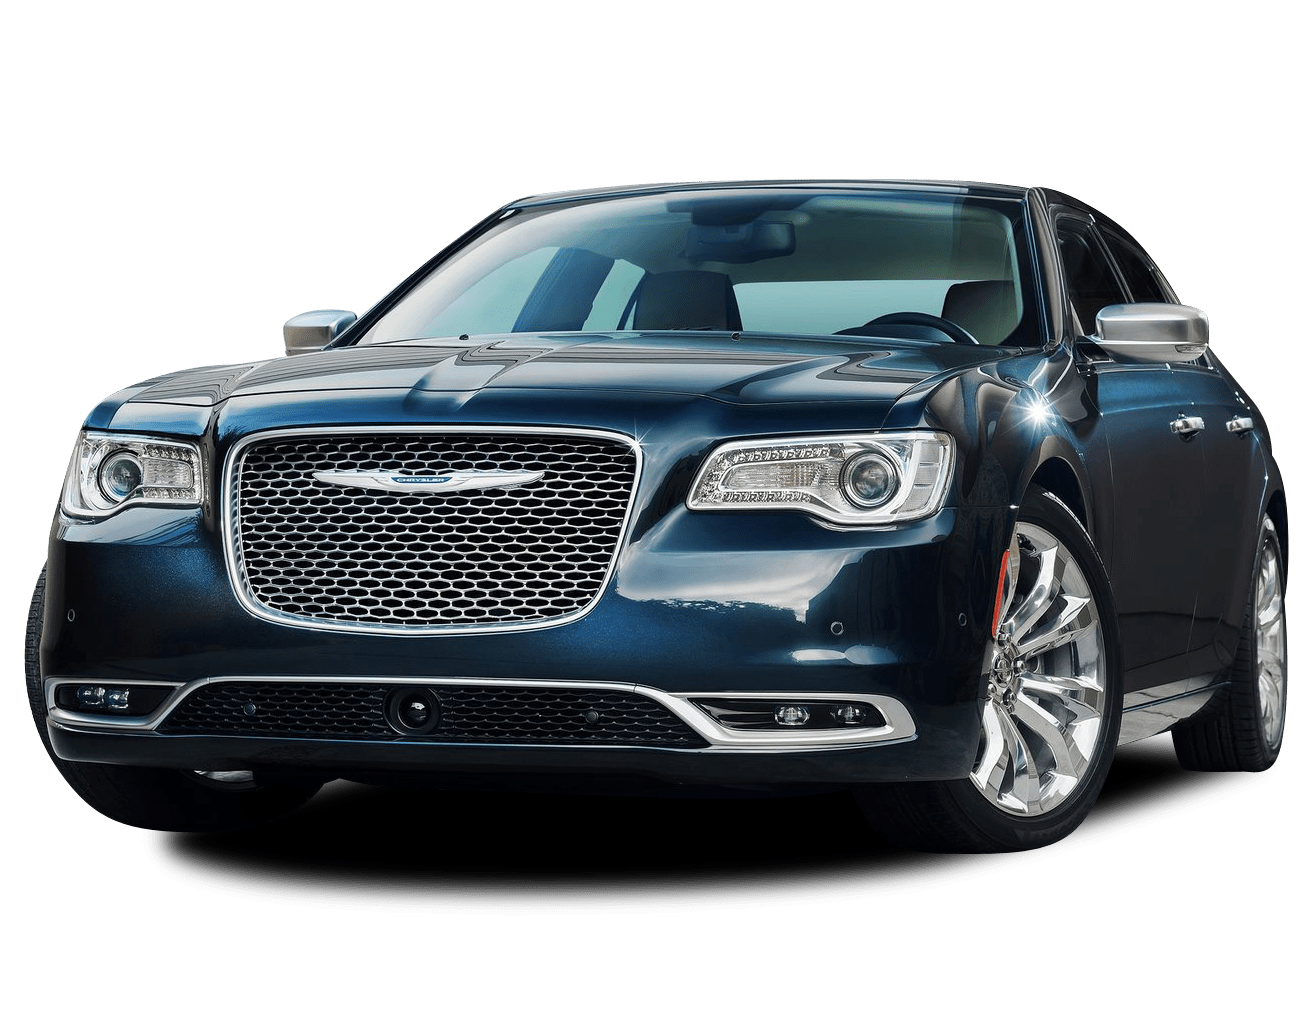 Chrysler 300 Review, For Sale, Colours, Specs, Models & News | CarsGuide